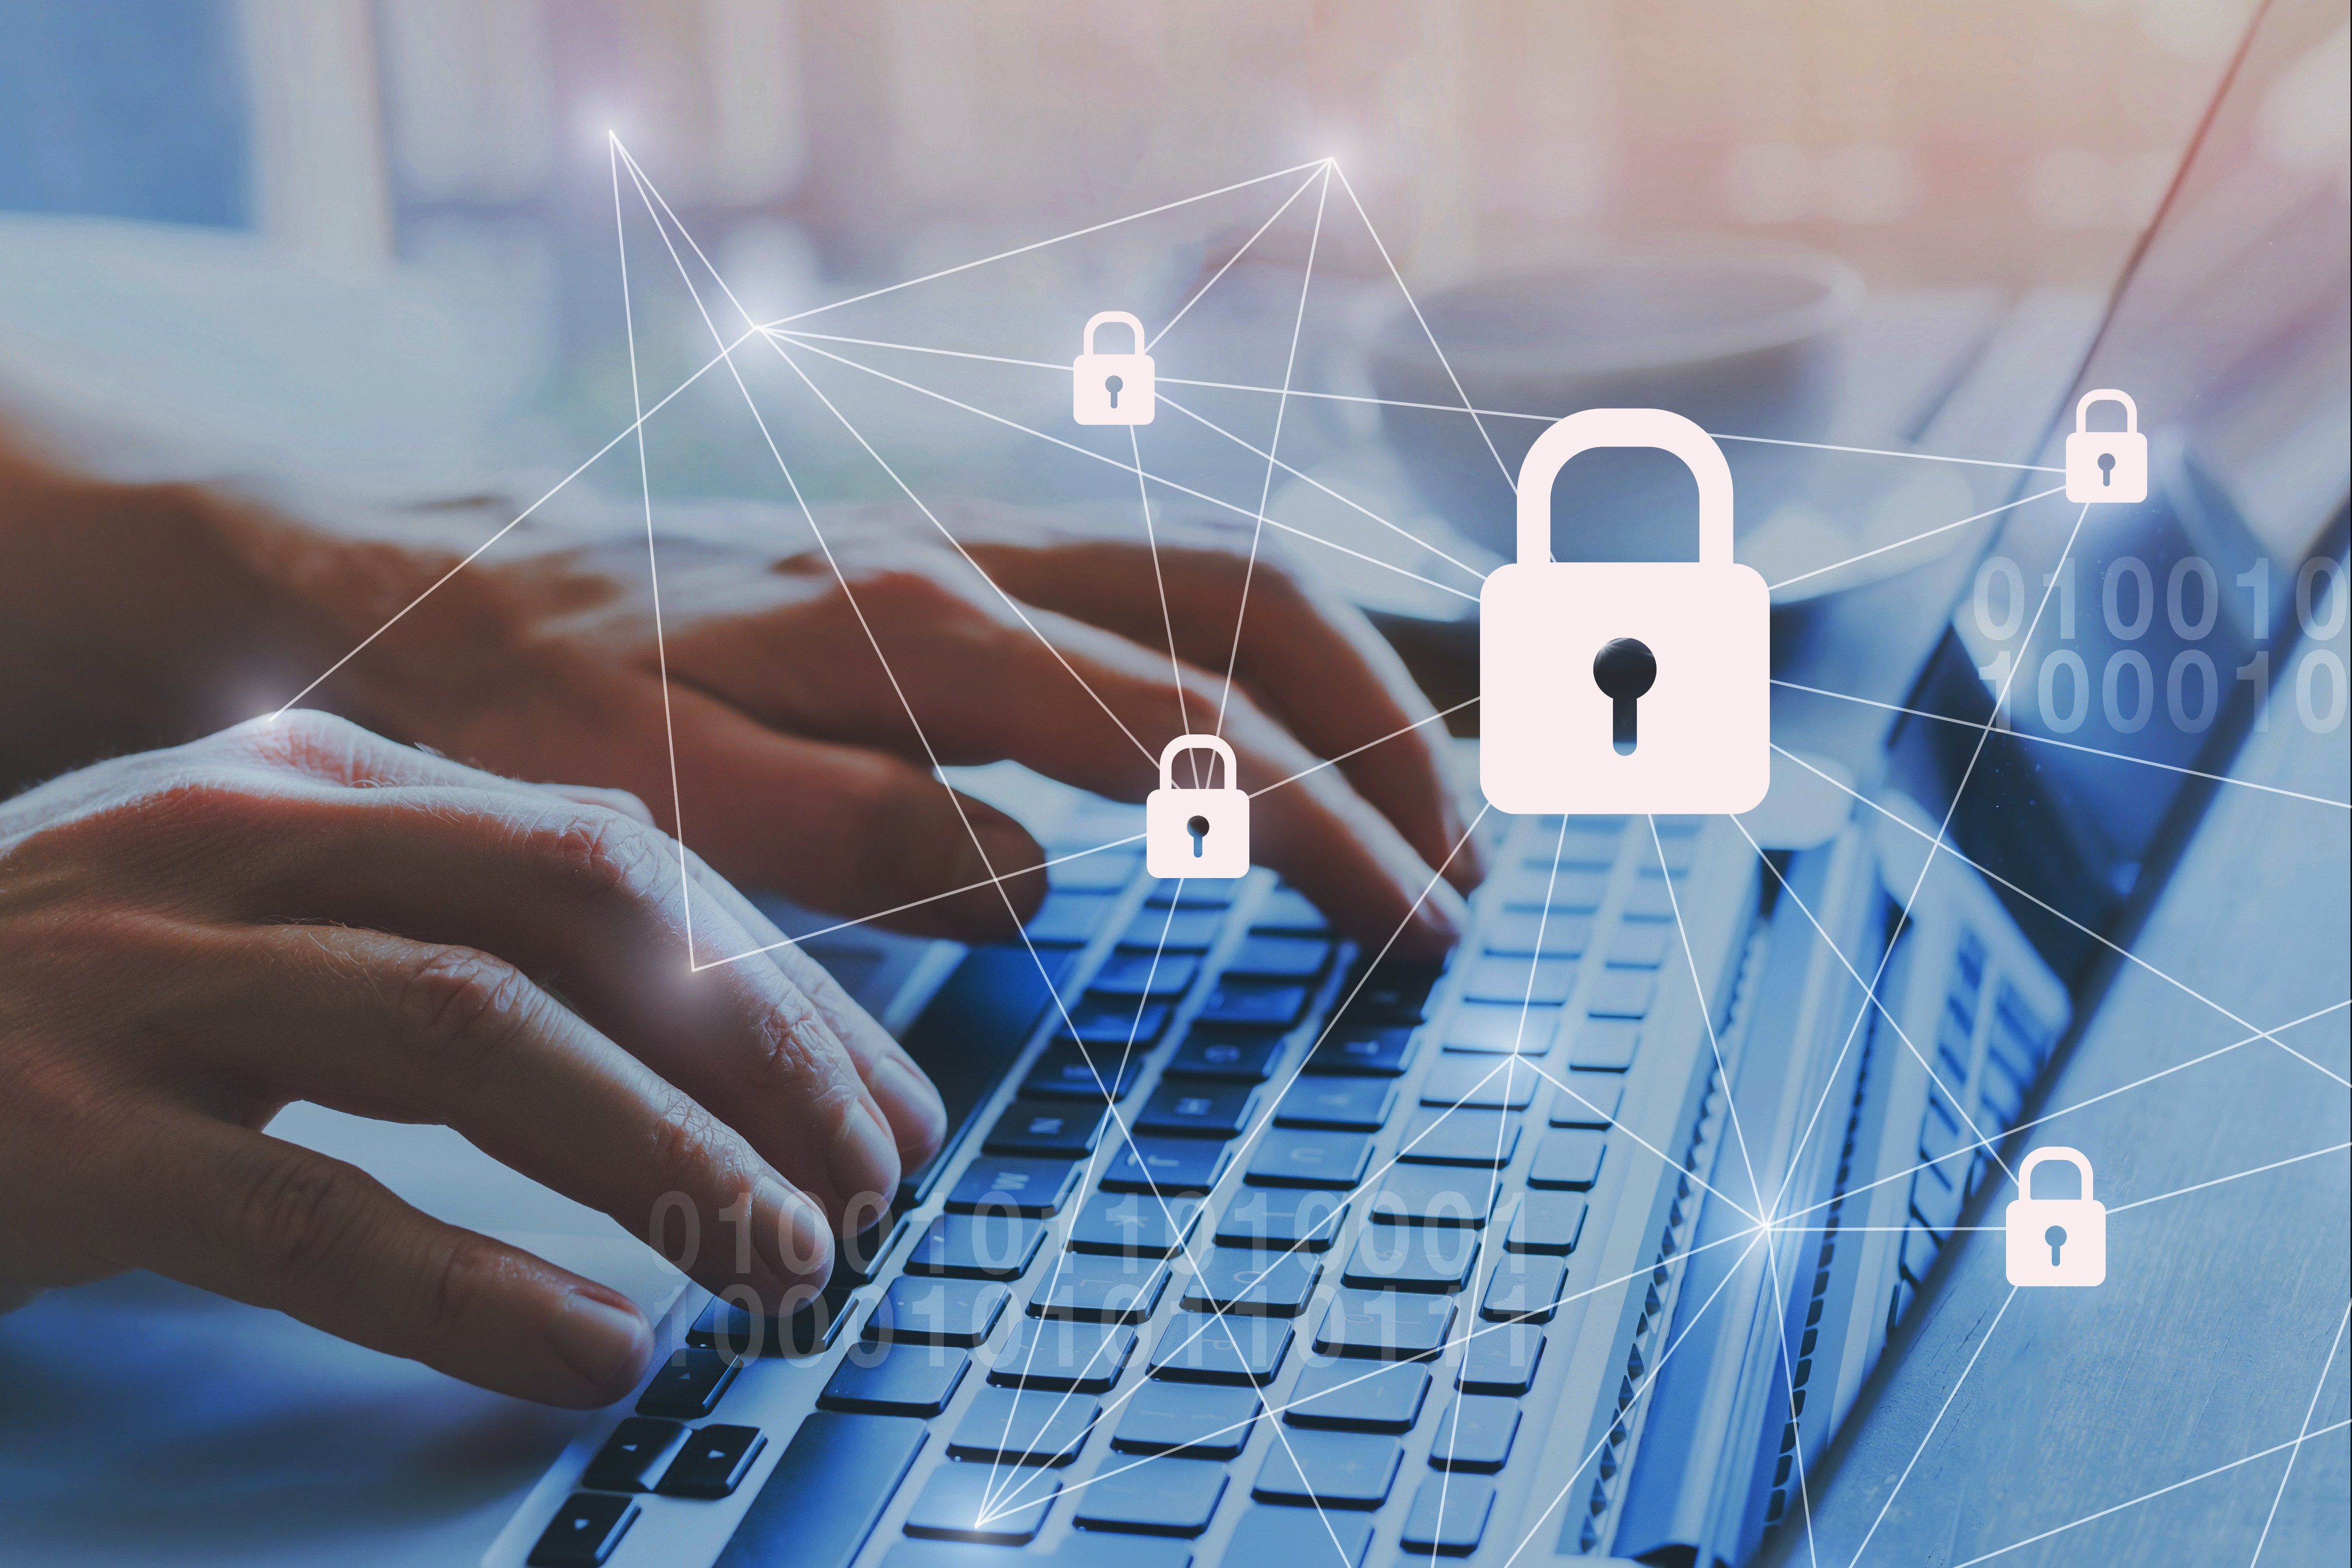 ESET, the global cybersecurity solutions provider, says the need for cybersecurity is particularly key in Asia, where countries across the continent are developing and pushing digitalisation efforts. Photo: Shutterstock